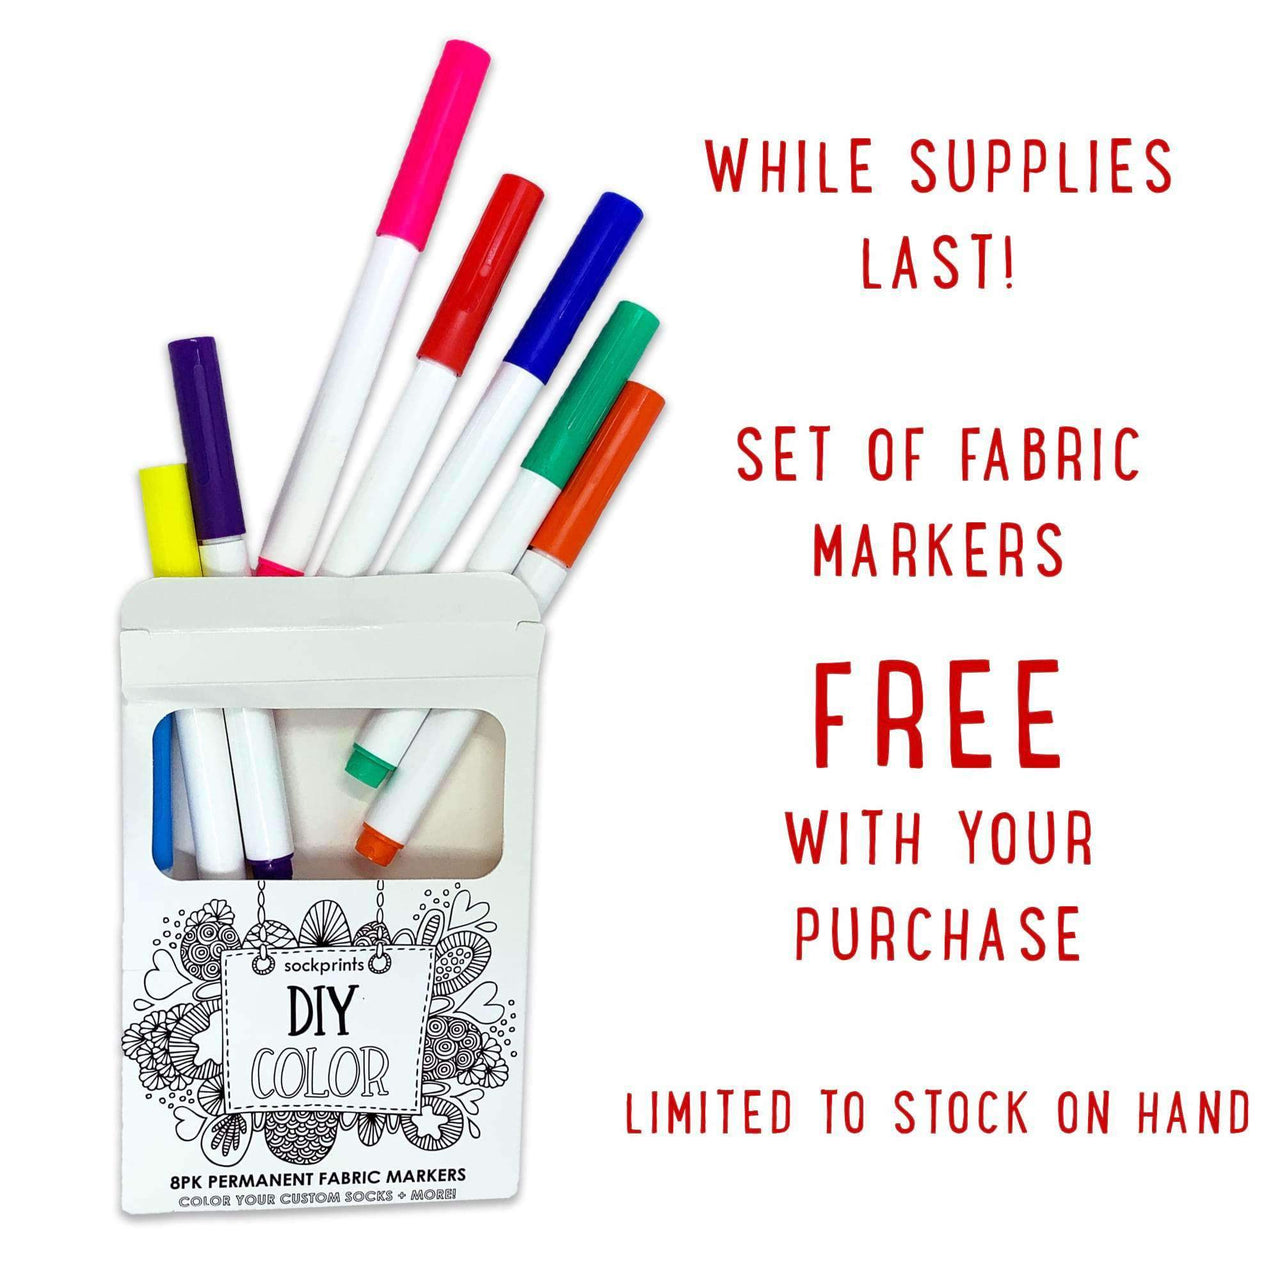 Free fabric markers with purchase of color in design digitally printed on no show socks..